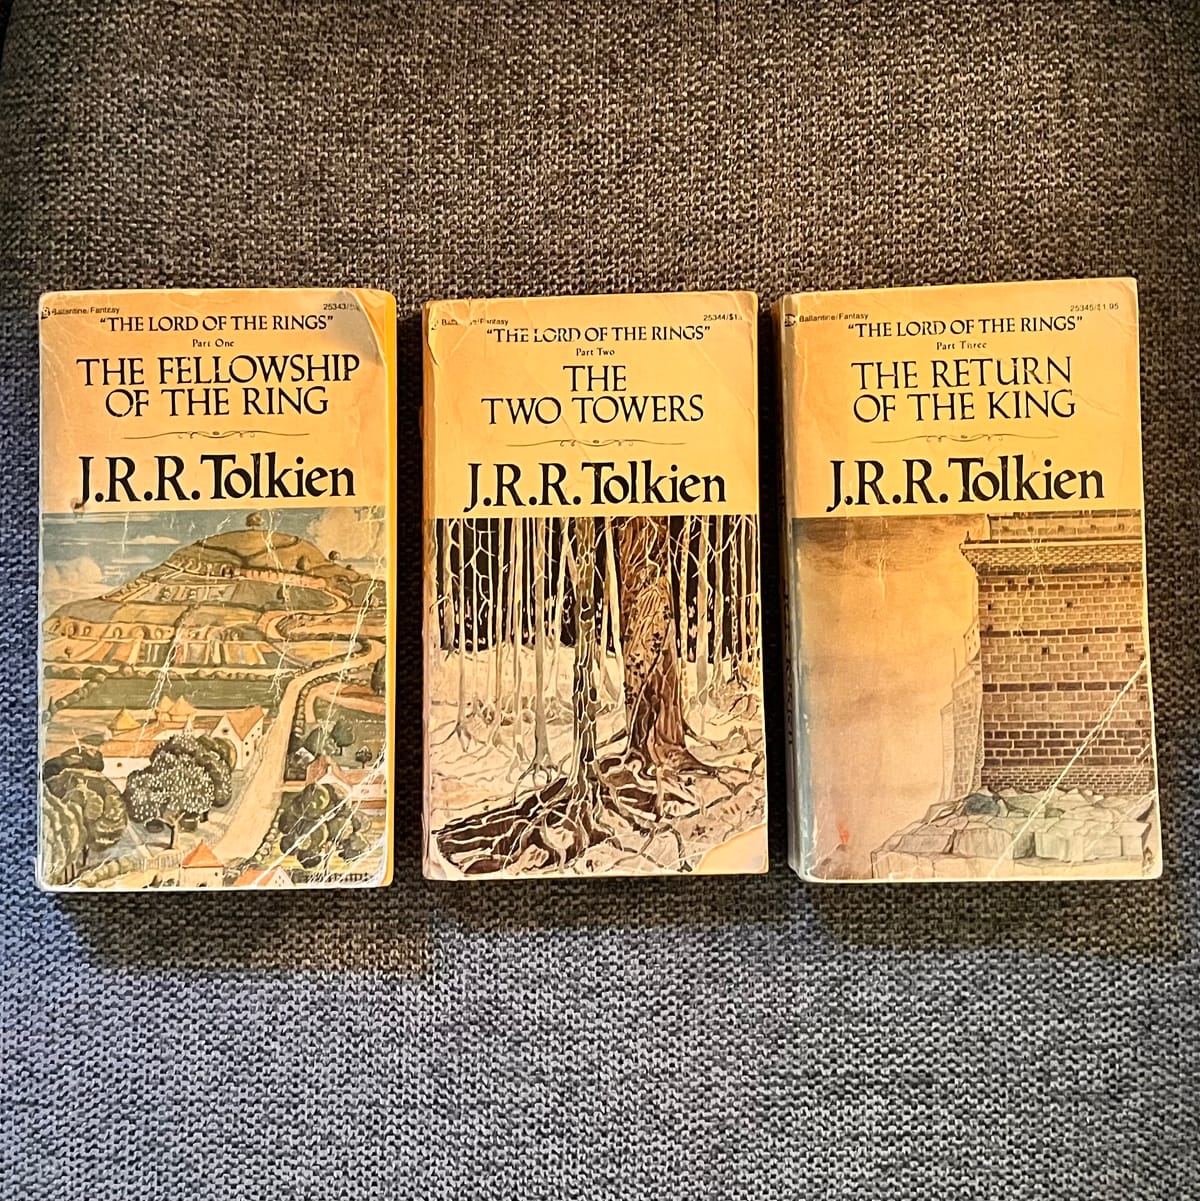 Influential Books: The Lord of the Rings